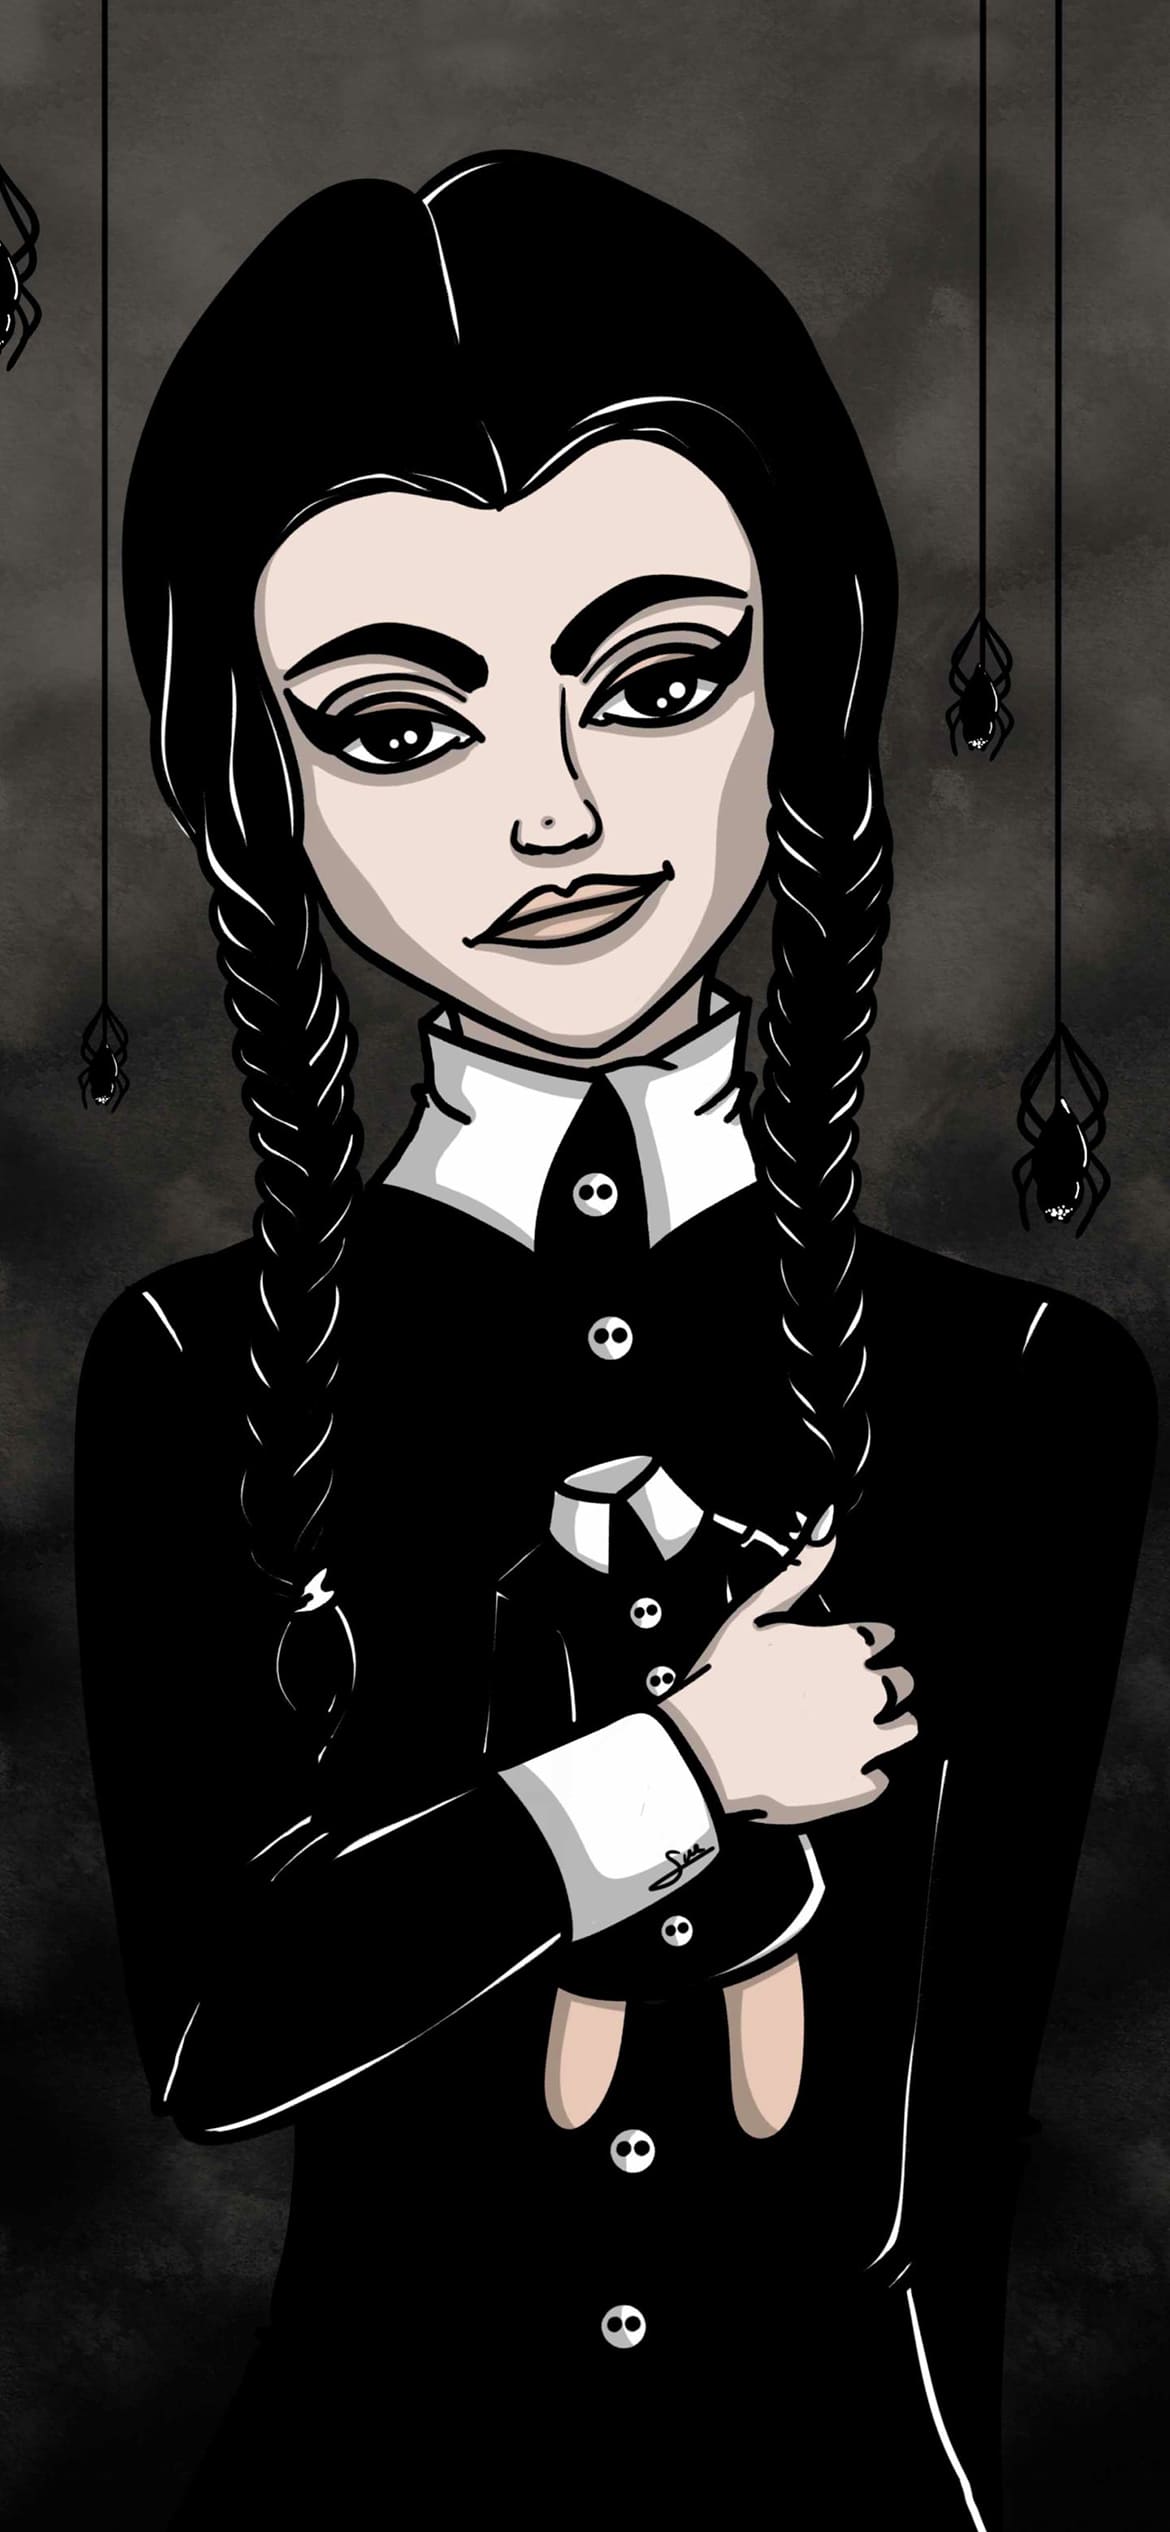 A cartoon drawing of an evil looking woman - Wednesday